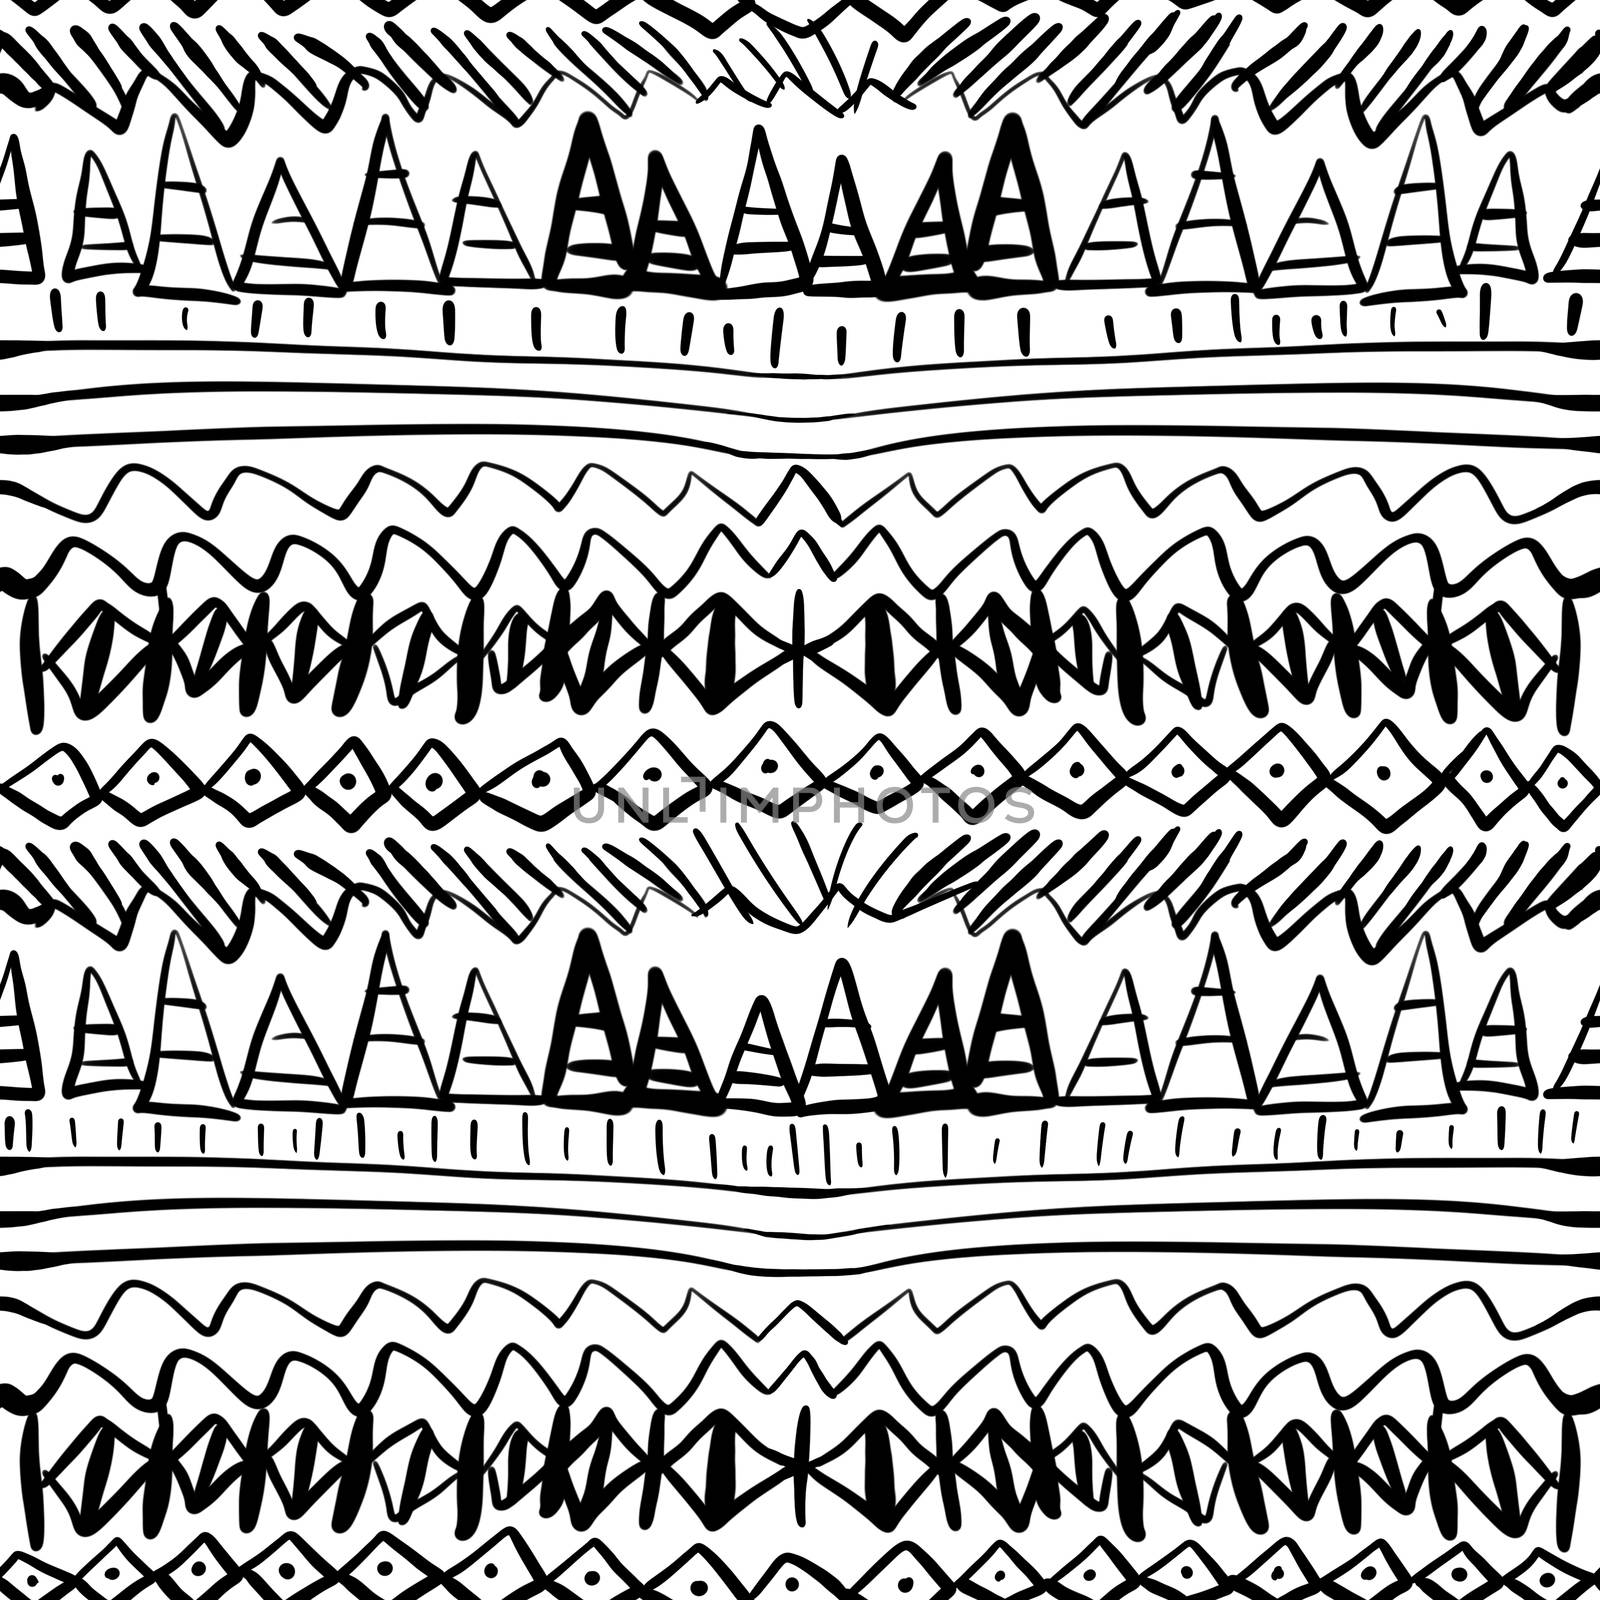 Black seamless ethnic and tribal pattern on white background. Hand drawn ornamental lines, geometric shapes. Black and white print for textile, wrapping paper, cards.